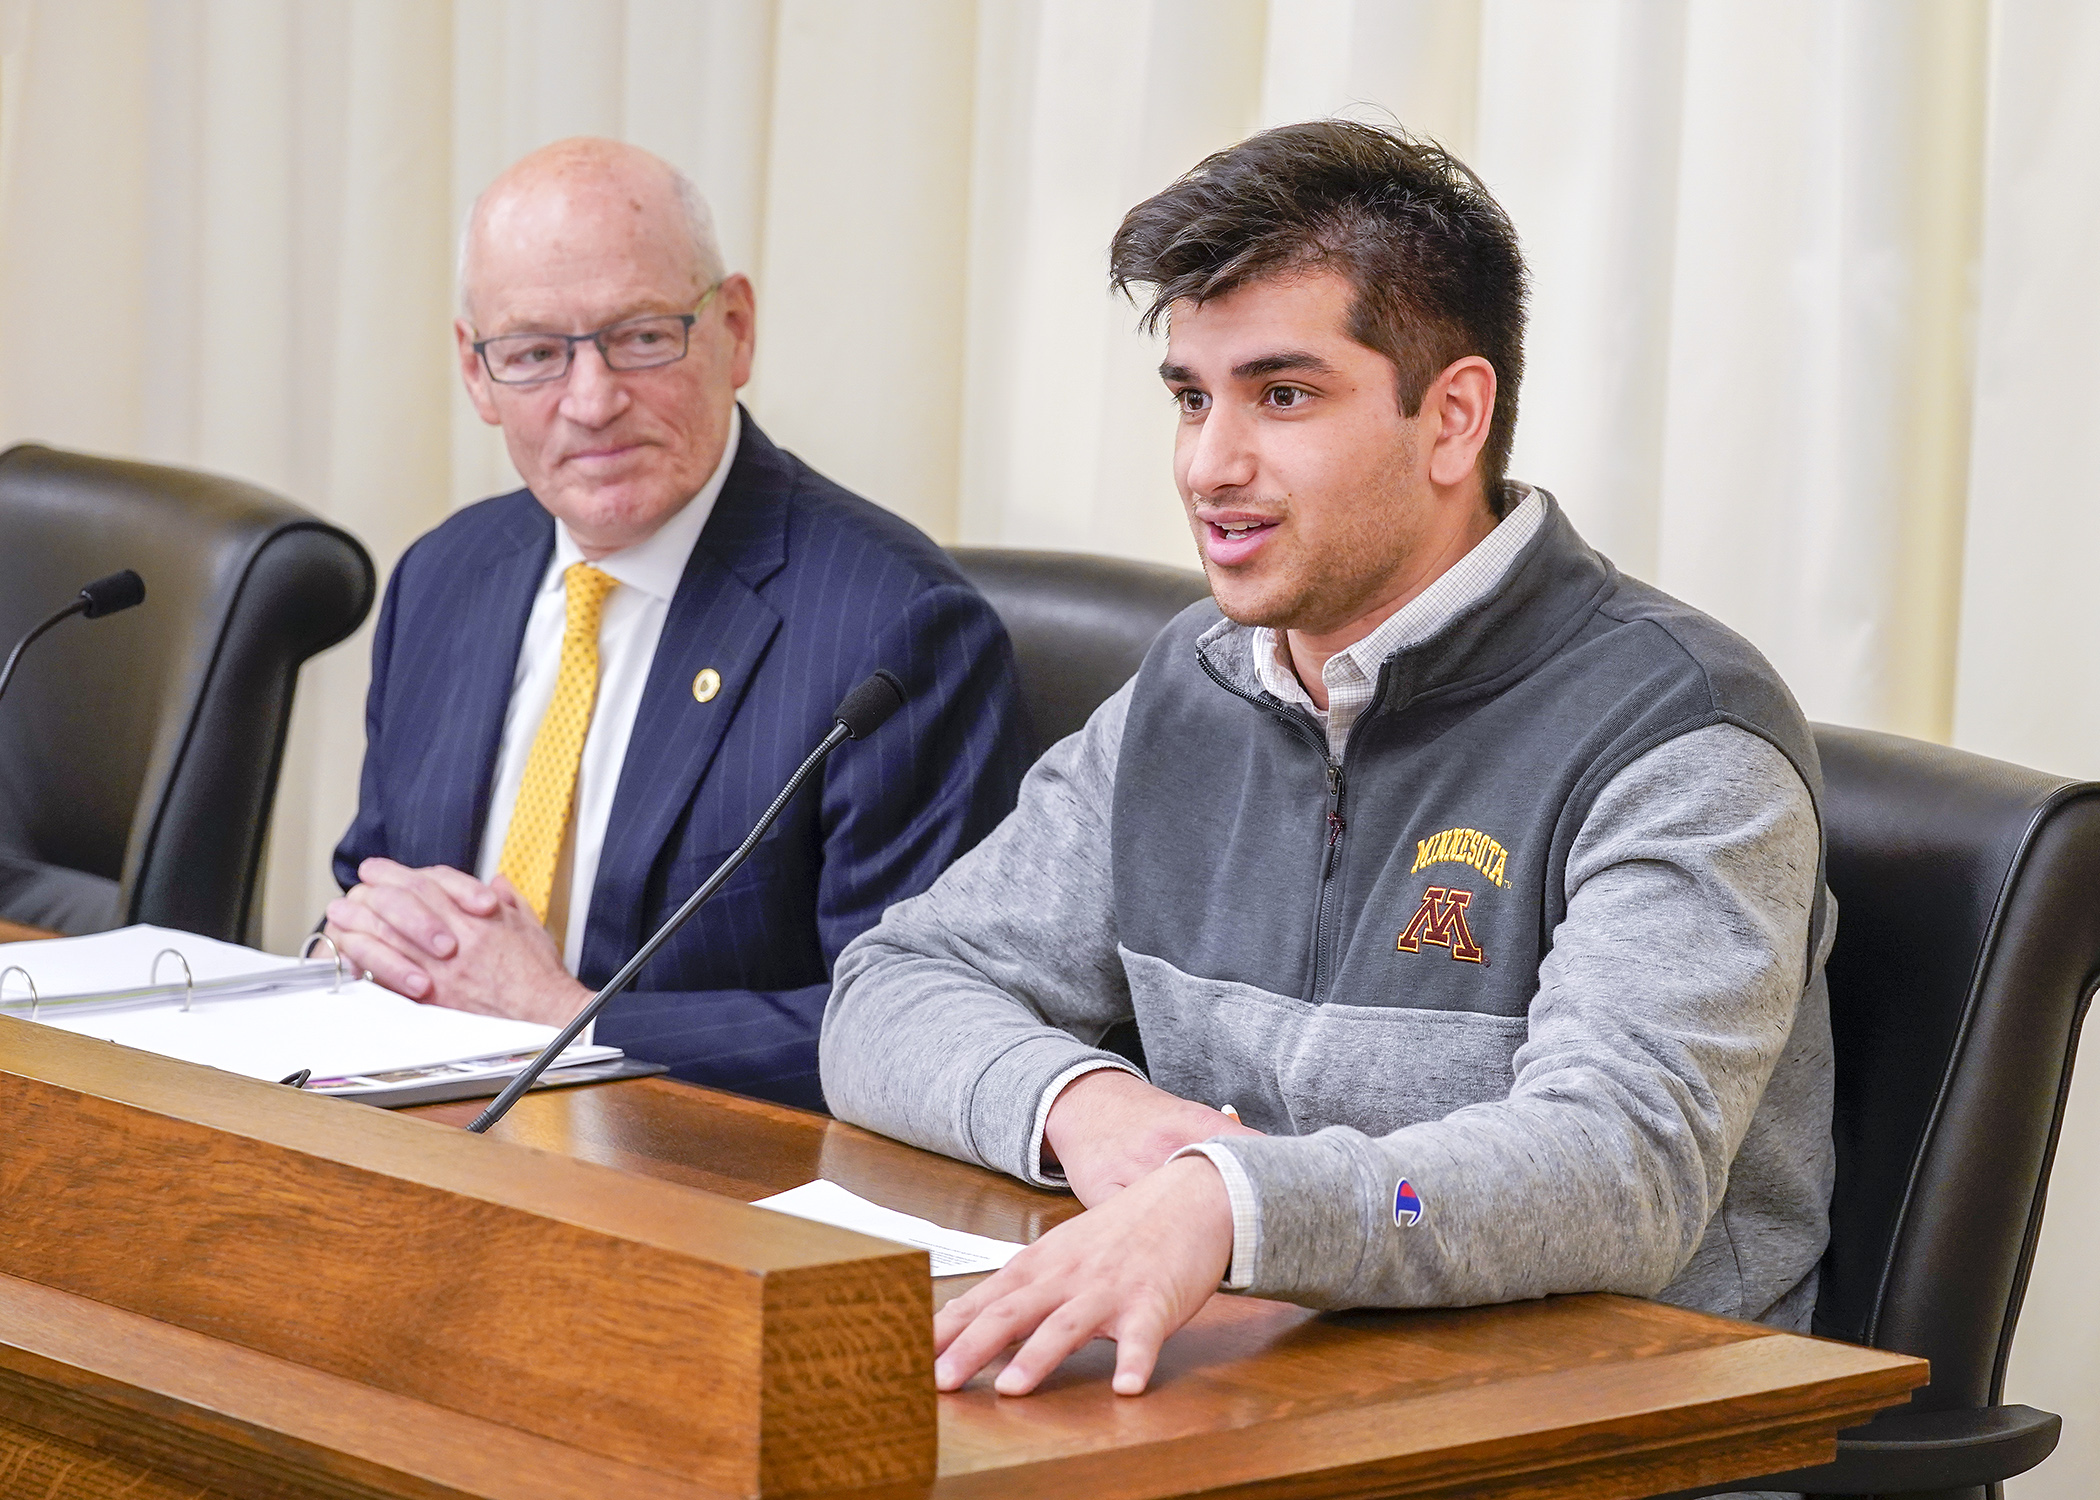 U of M student Mustafa Syed testifies Jan. 18 before House lawmakers with Myron Frans, the school’s senior vice president for finance and operations, during a presentation on asset preservation and replacement needs. (Photo by Andrew VonBan)